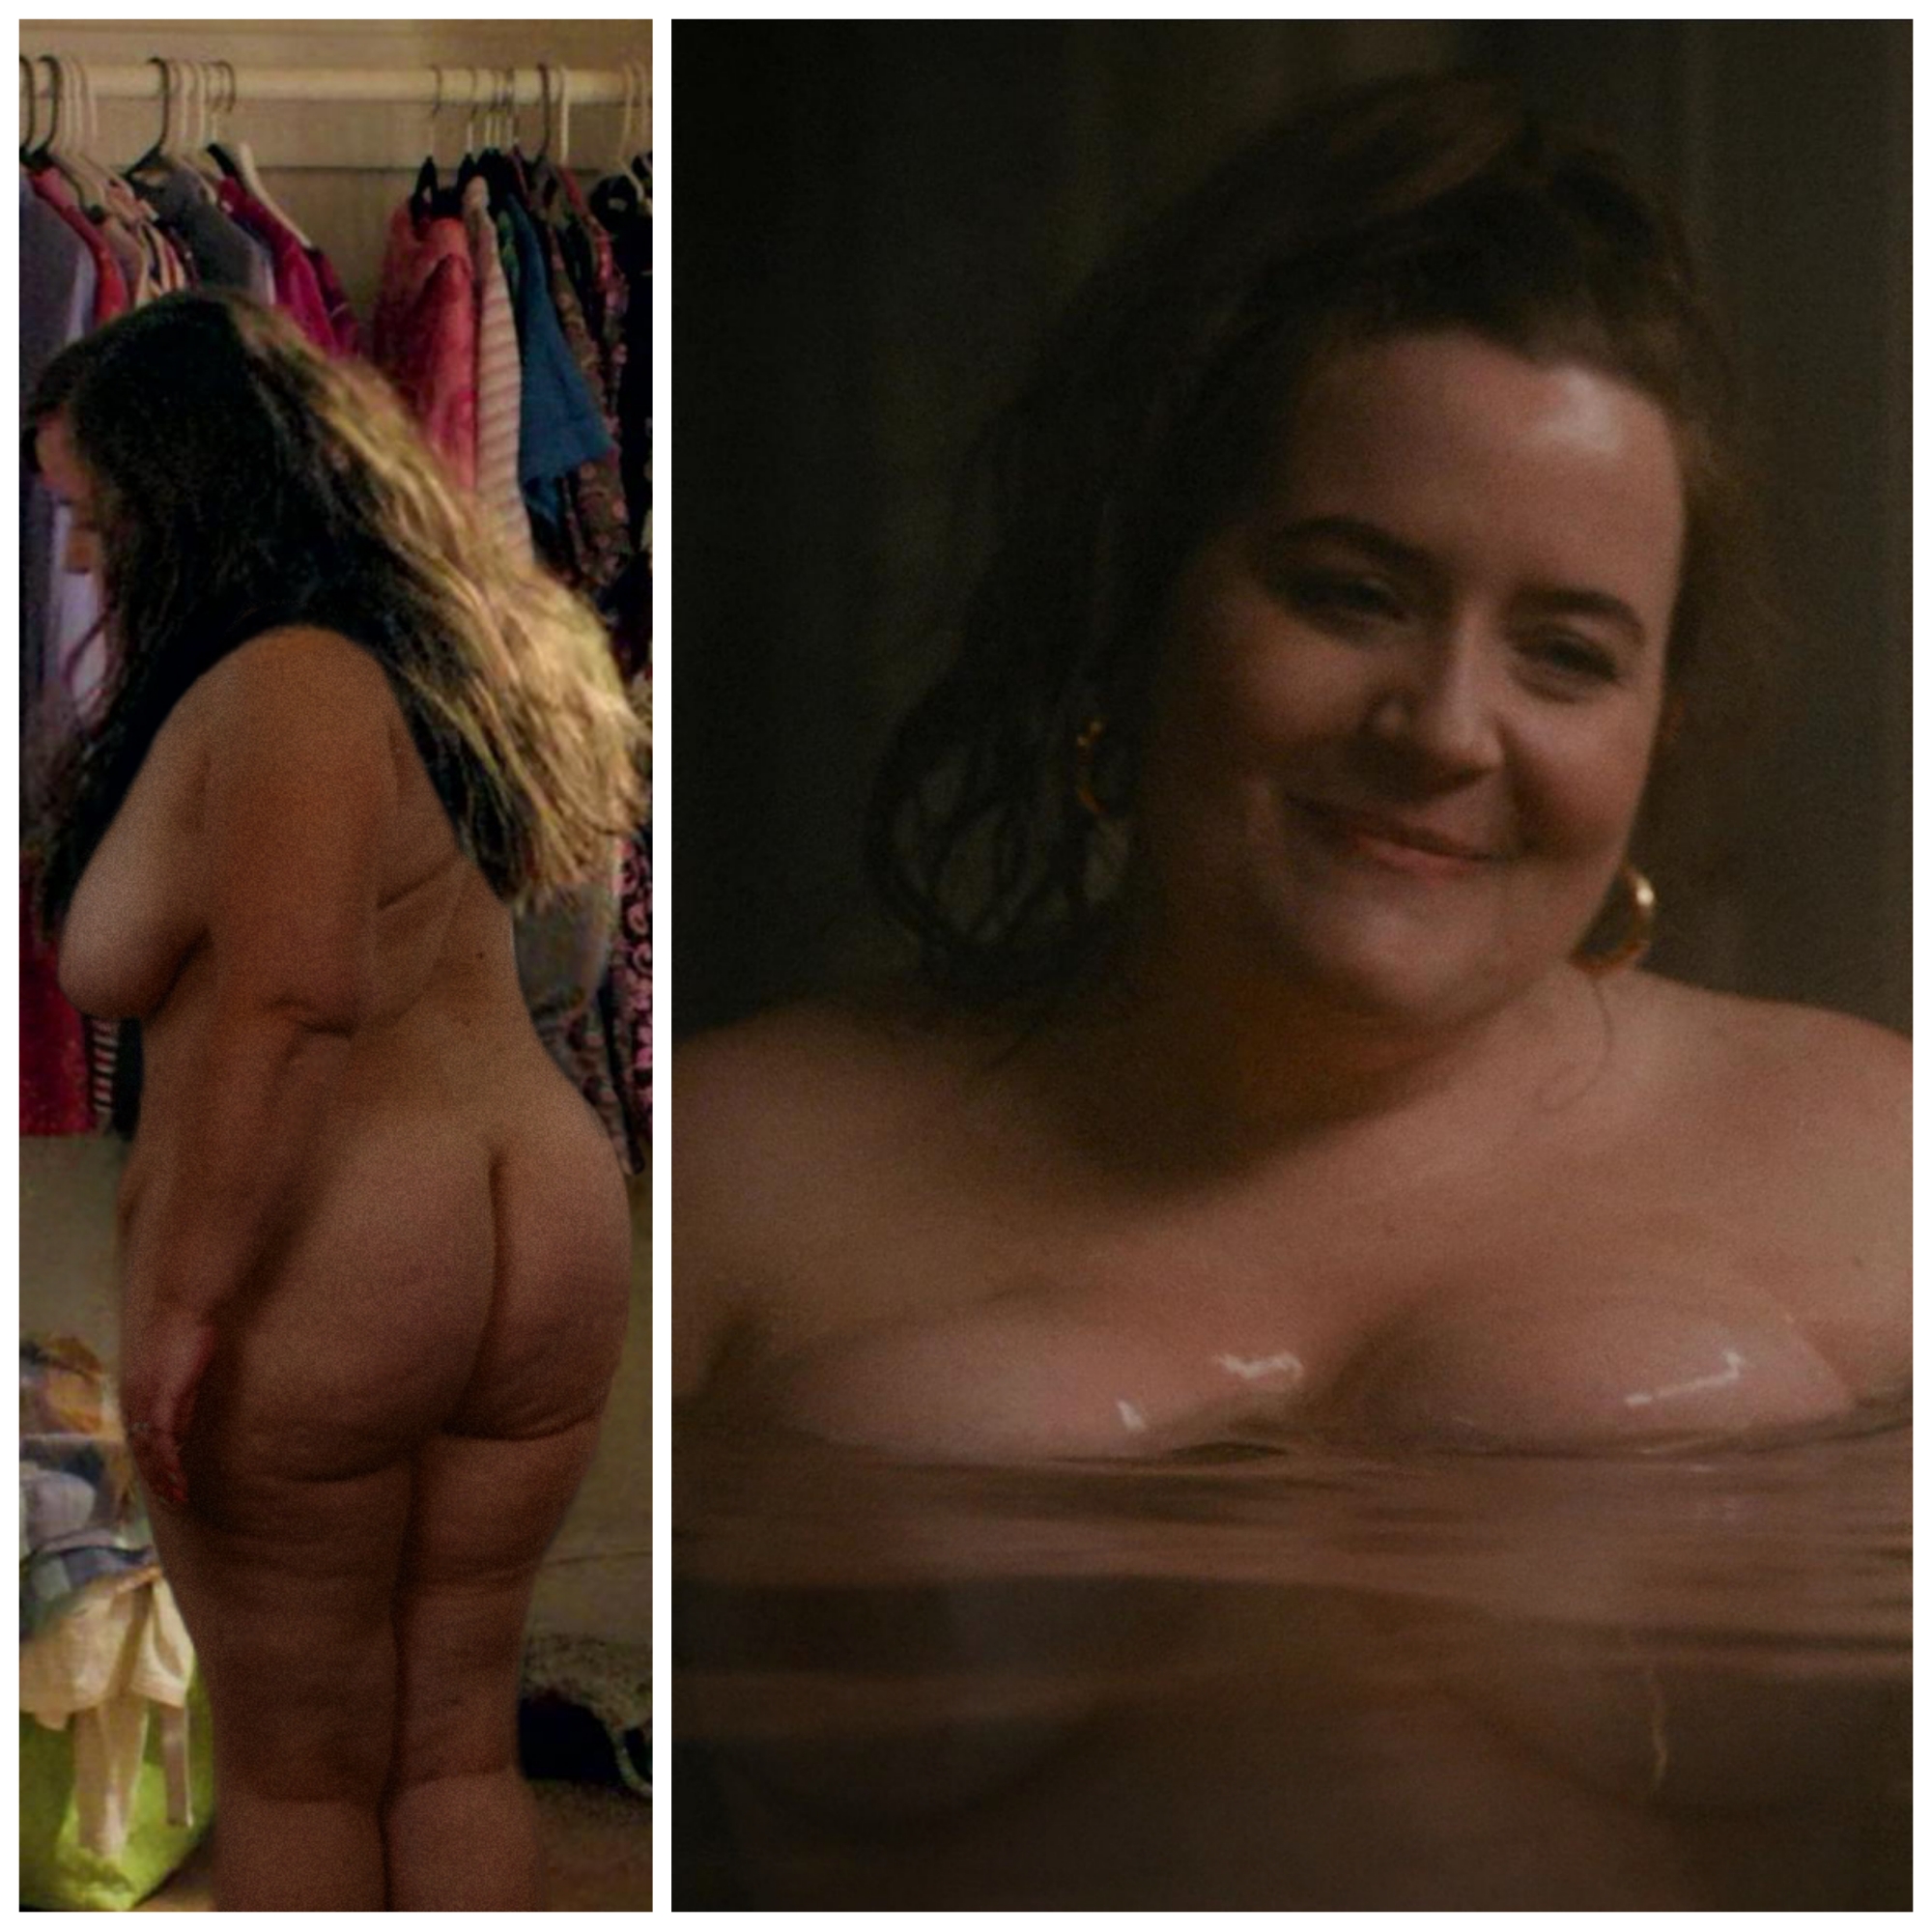 chase raines add aidy bryant nude photo